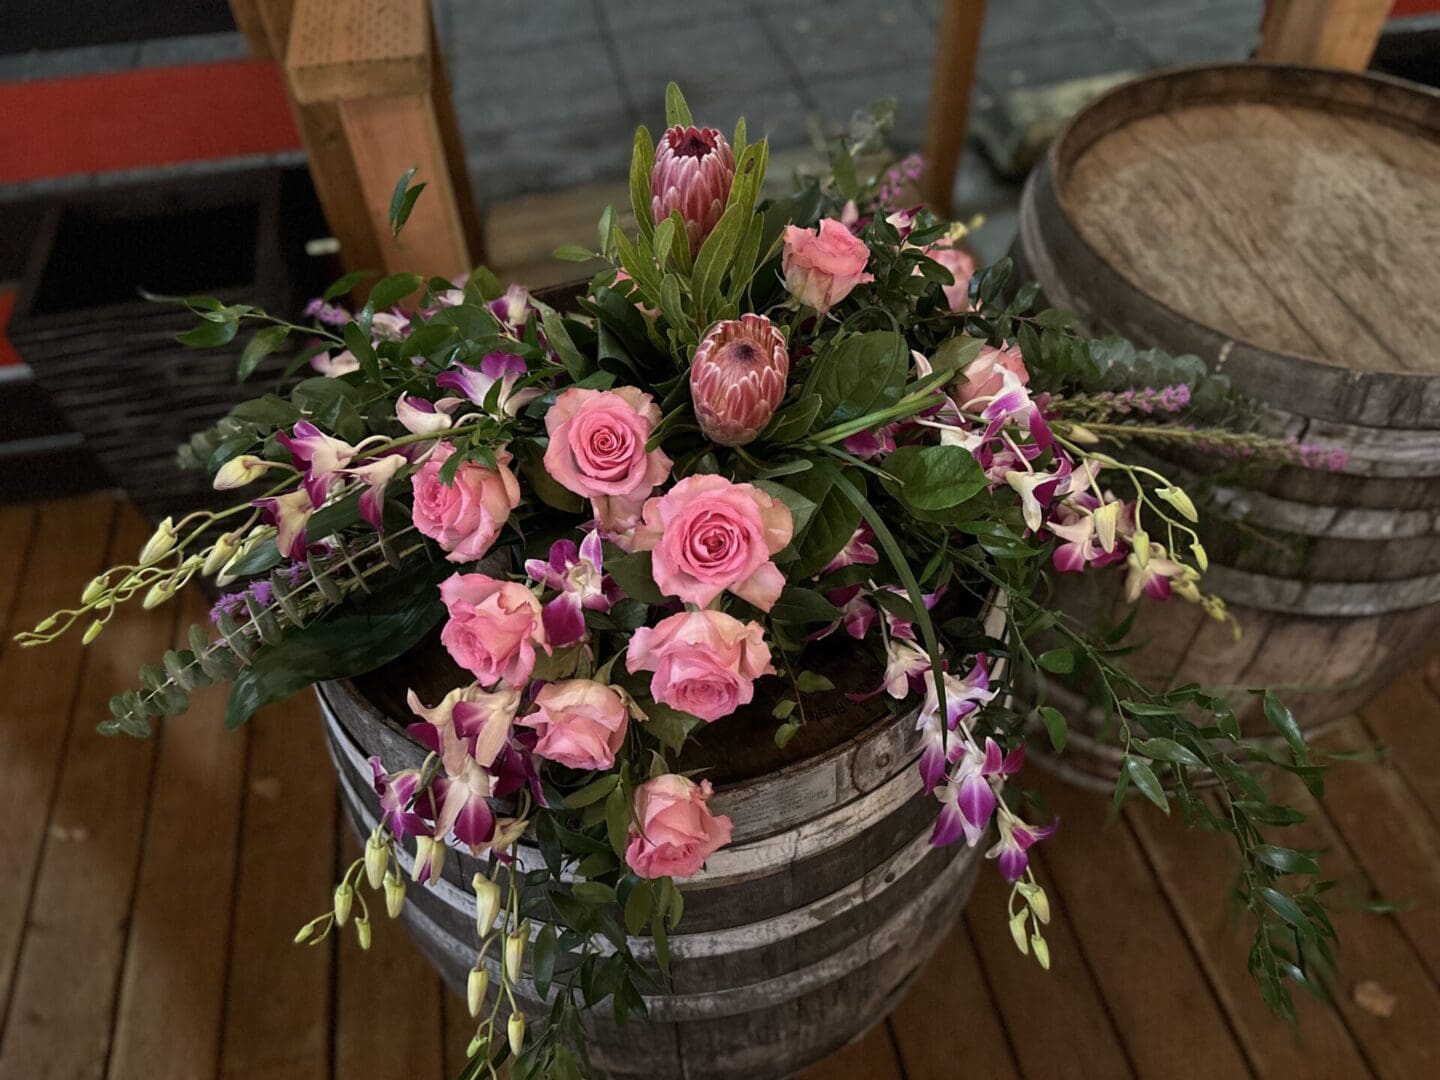 A bouquet of flowers in a barrel on the ground.